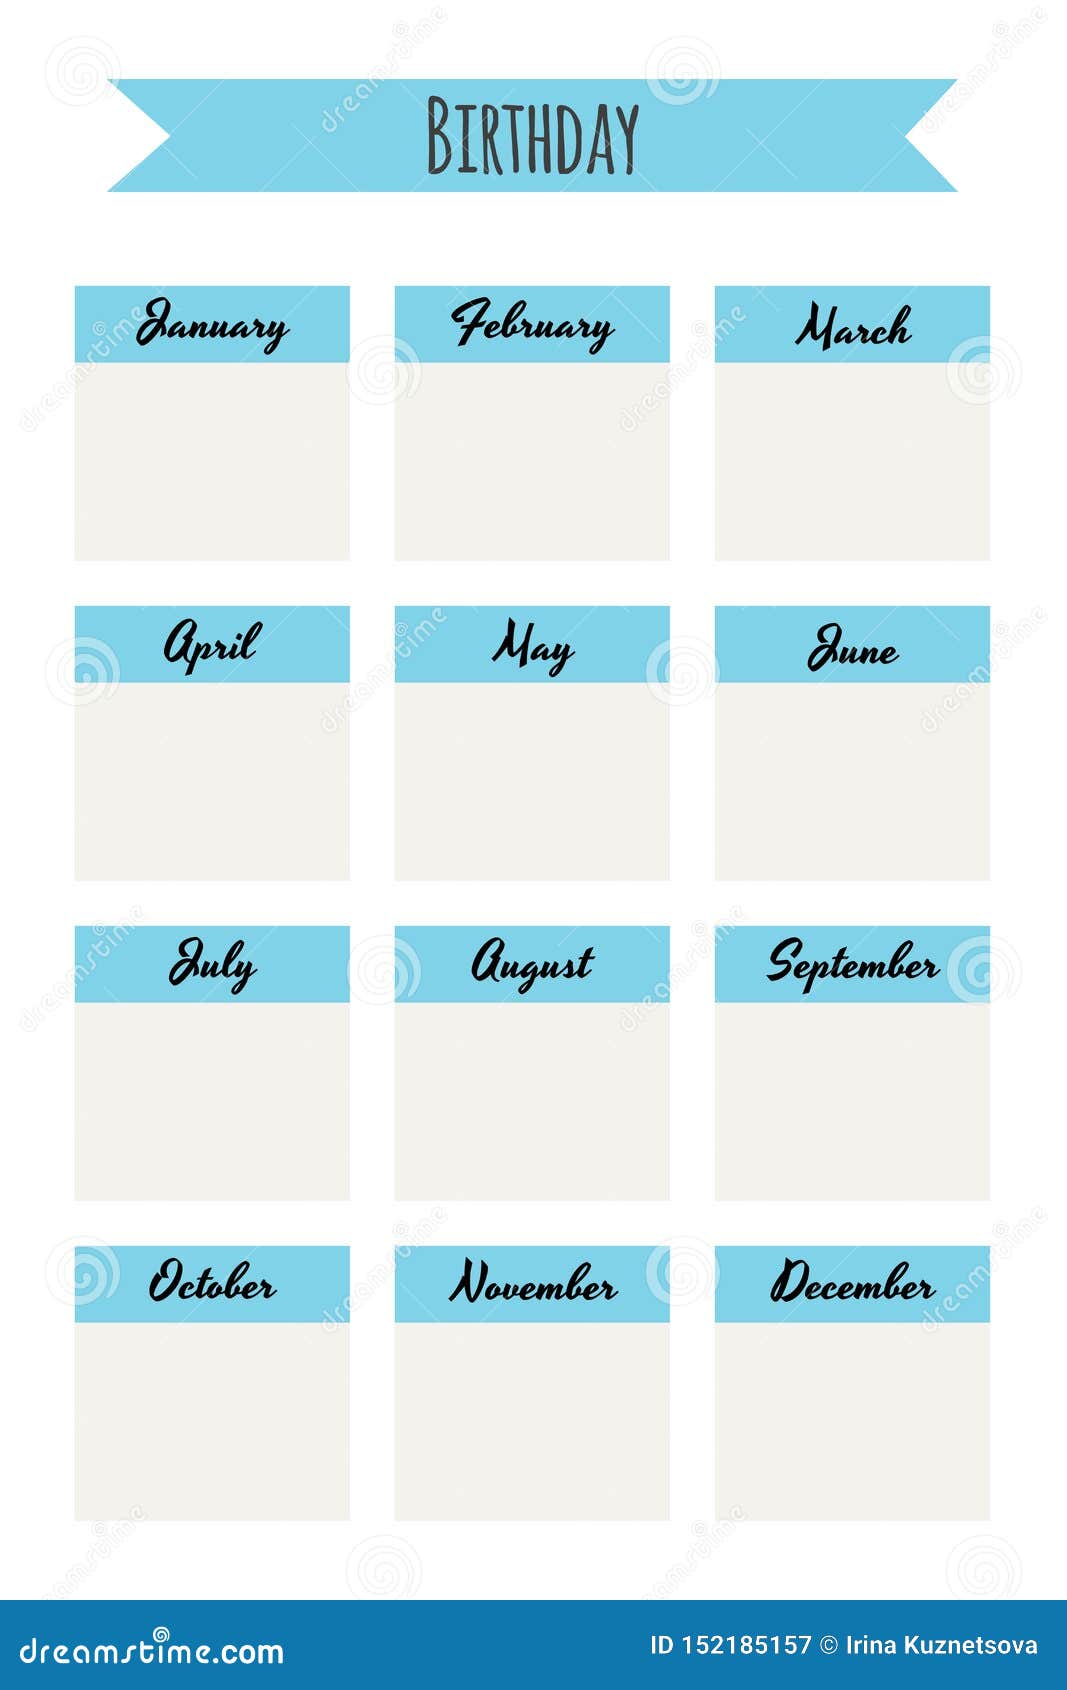 template-birthday-list-simple-monthly-planner-with-blue-stock-vector-illustration-of-march